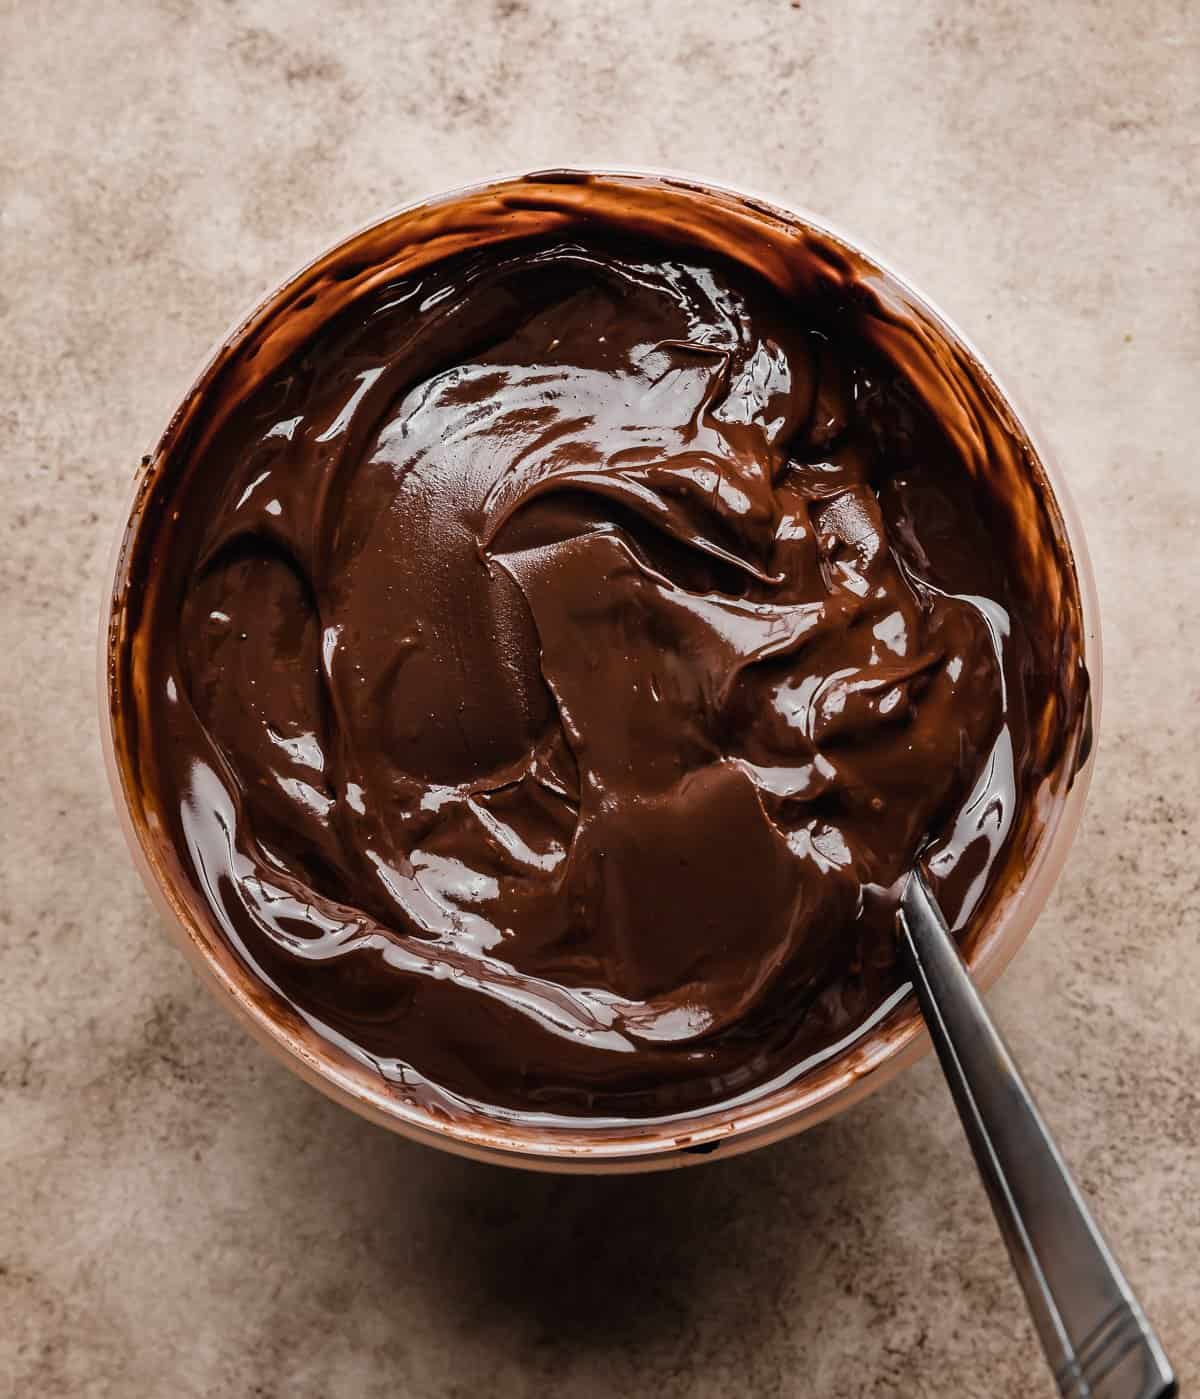 Chocolate ganache in a bowl on a beige background, to be used as a filling for a s'mores layer cake.